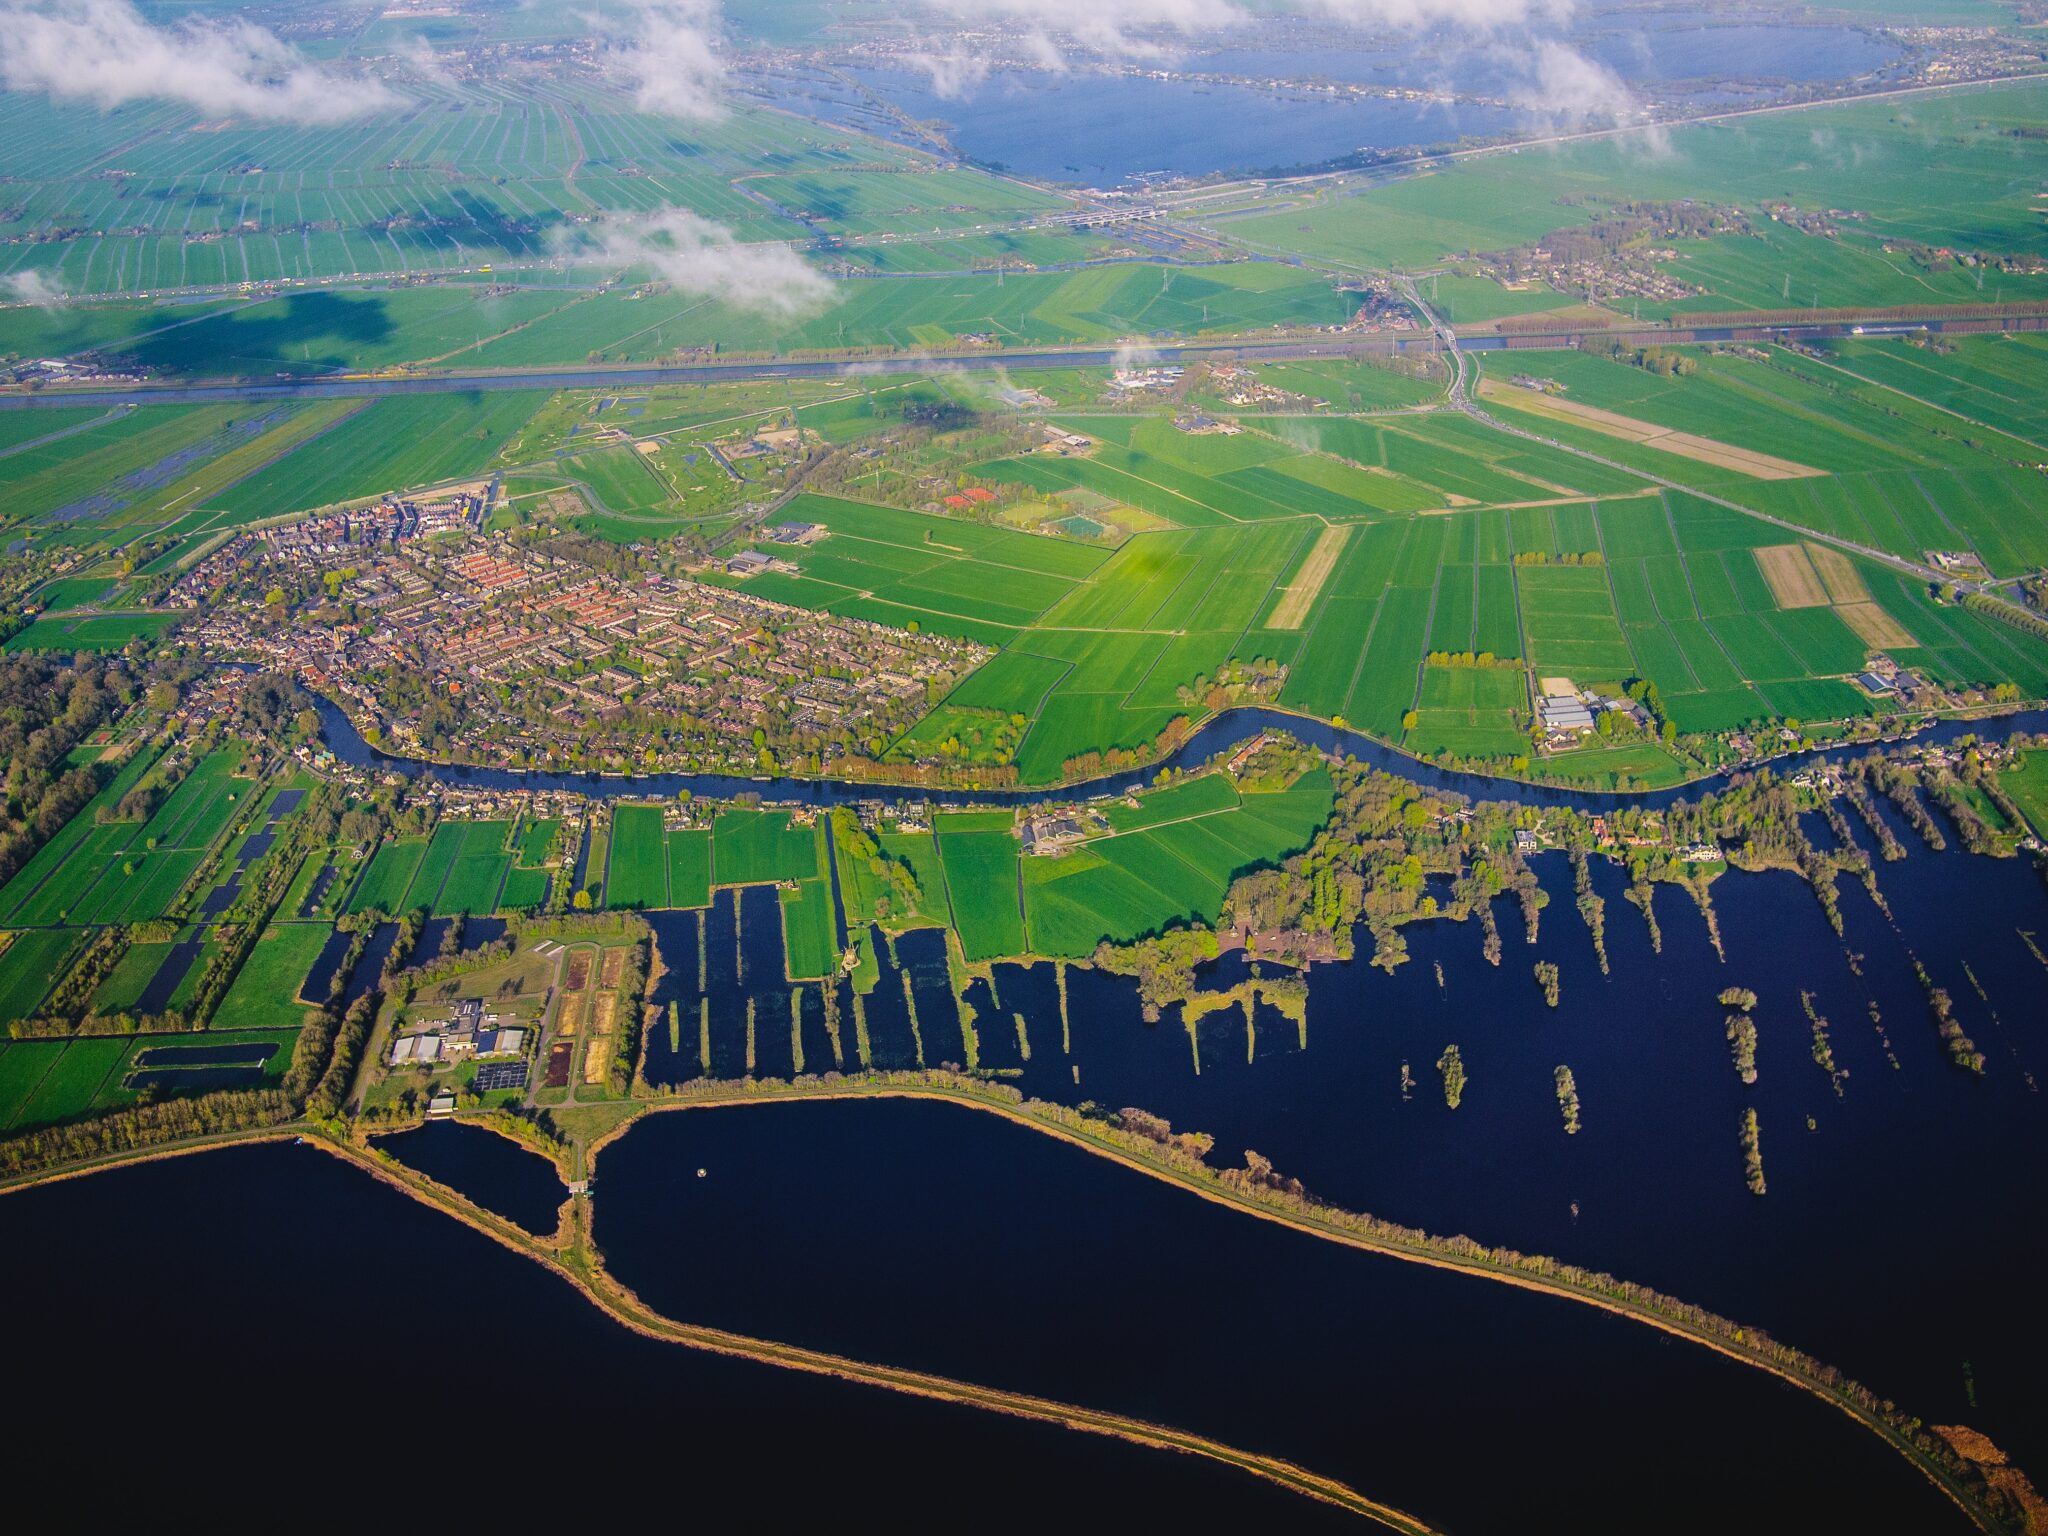 Areal shot of Vinkeveense Plassen, one of the top scuba diving spots in the Netherlands